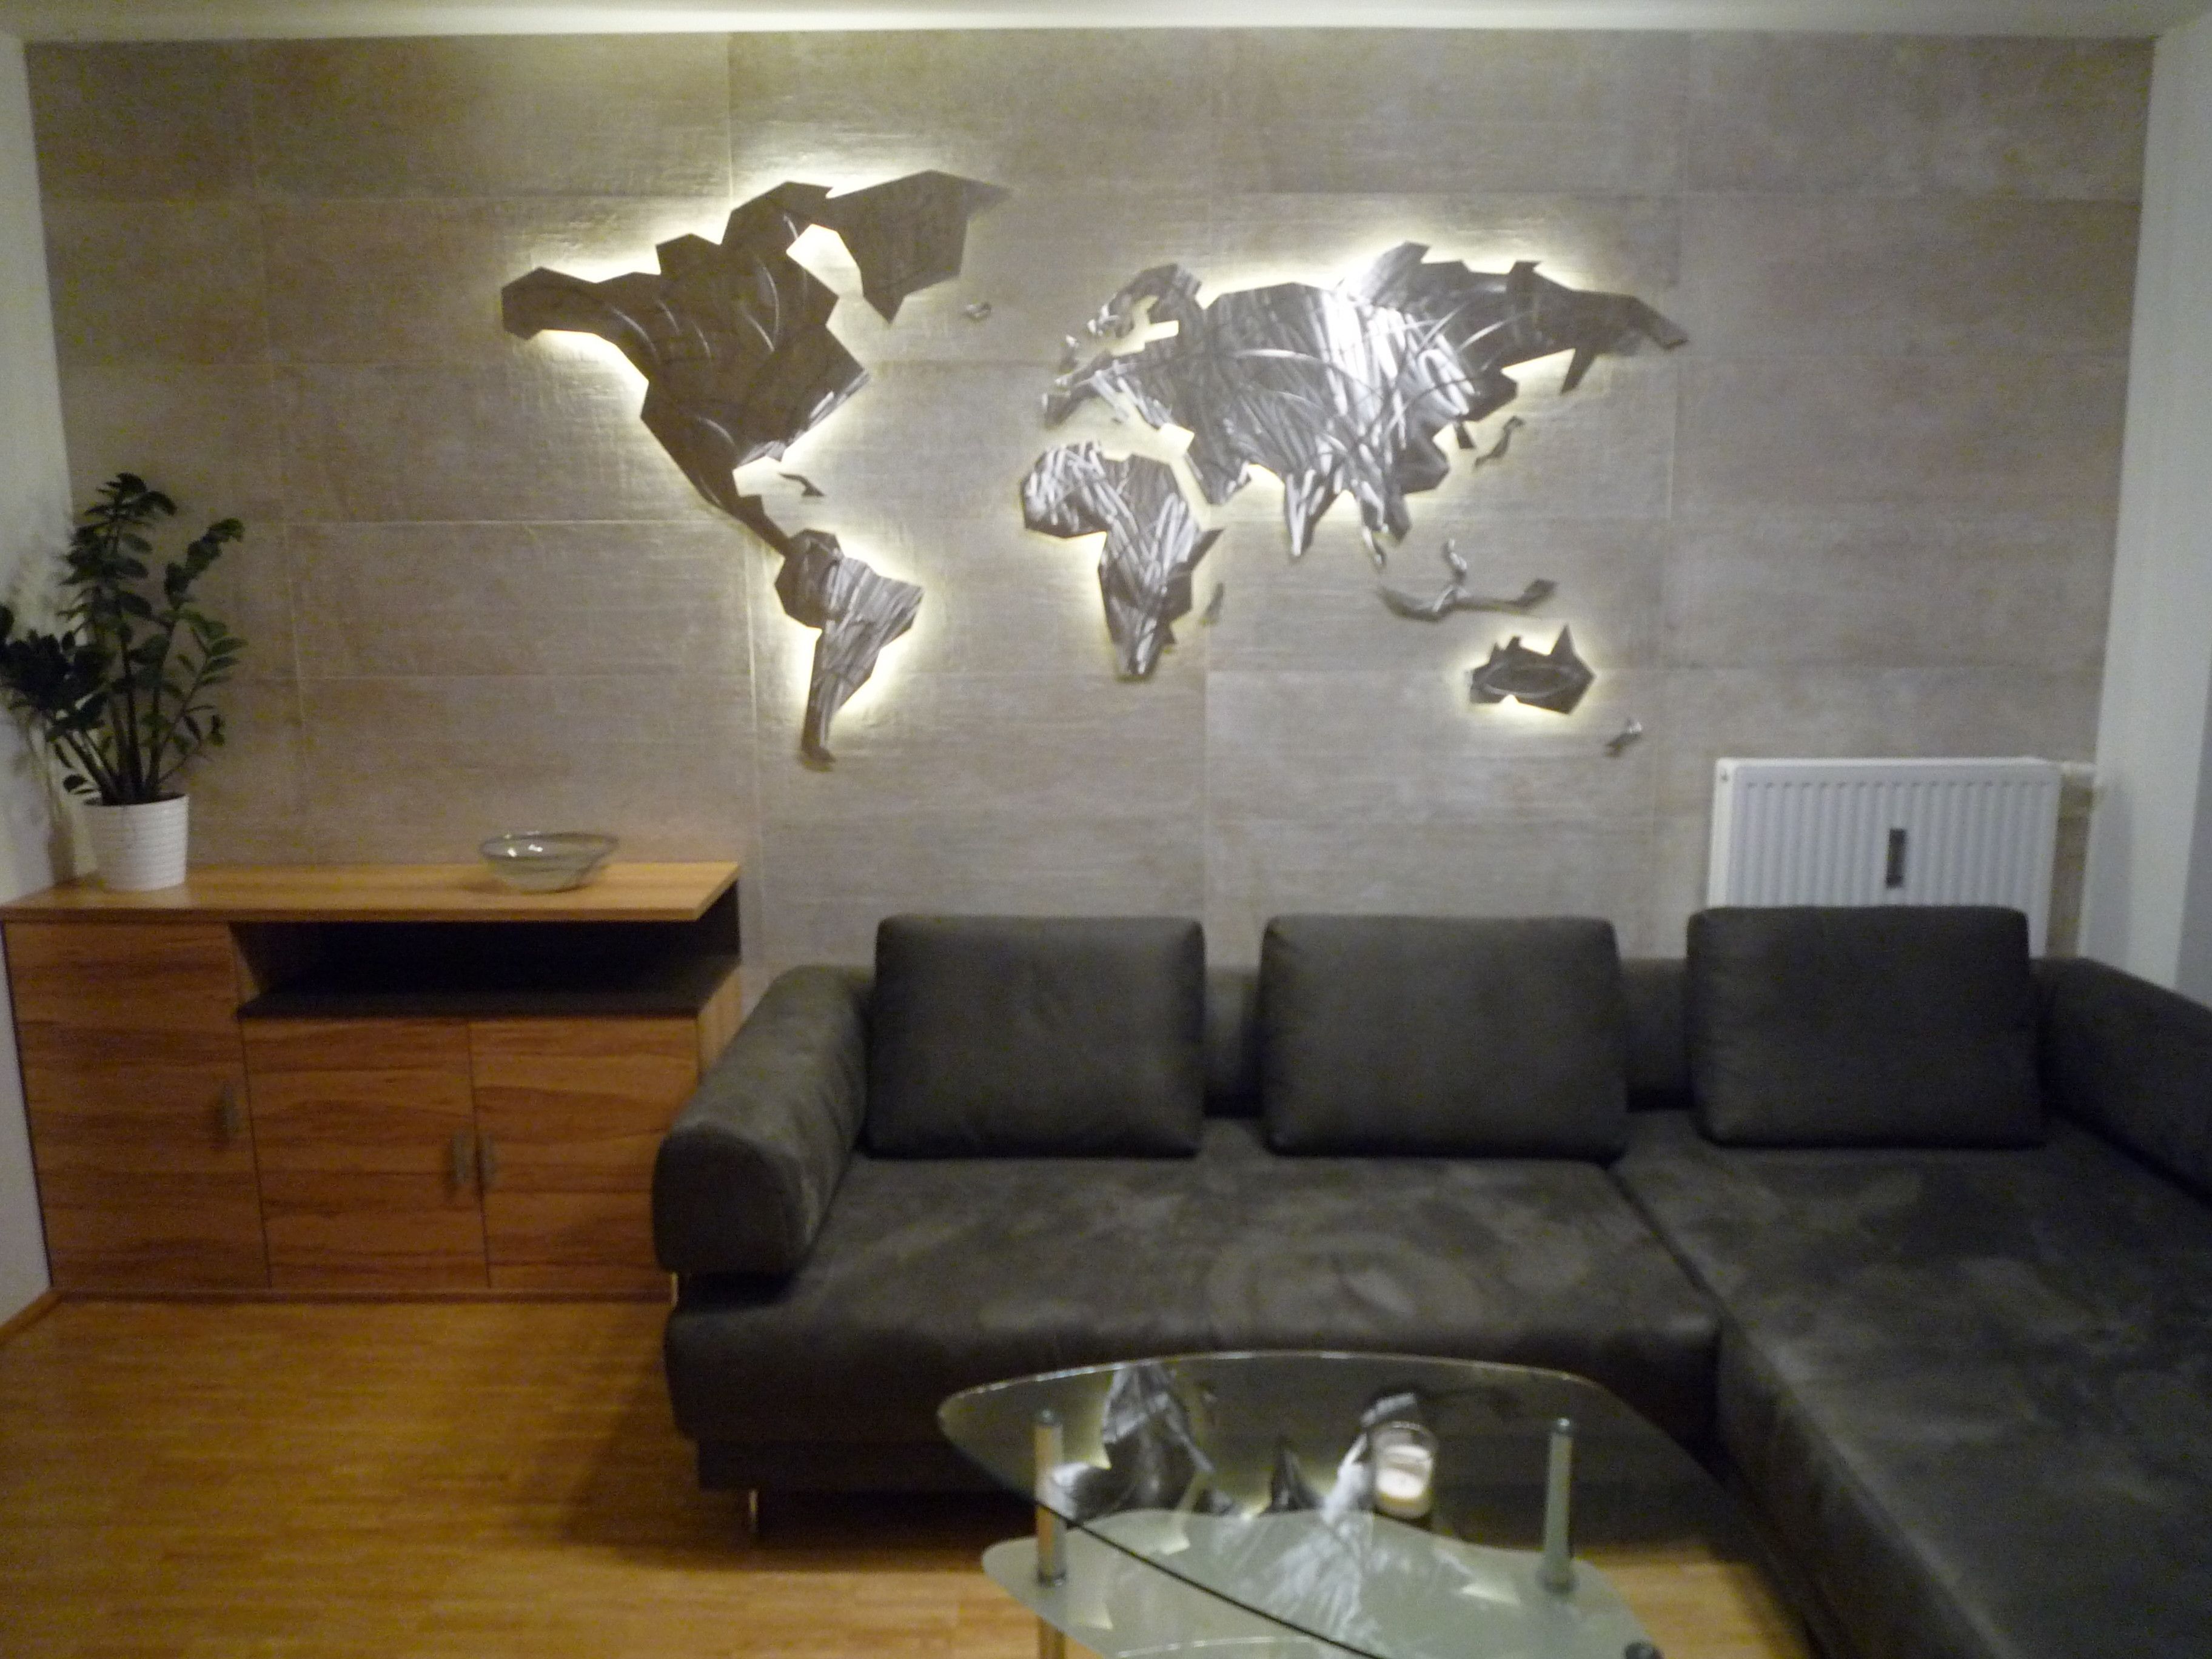 39 Inspirational World Map Wall Art Framed Design Ideas Of Led Wall Within Seattle Map Wall Art (View 19 of 20)